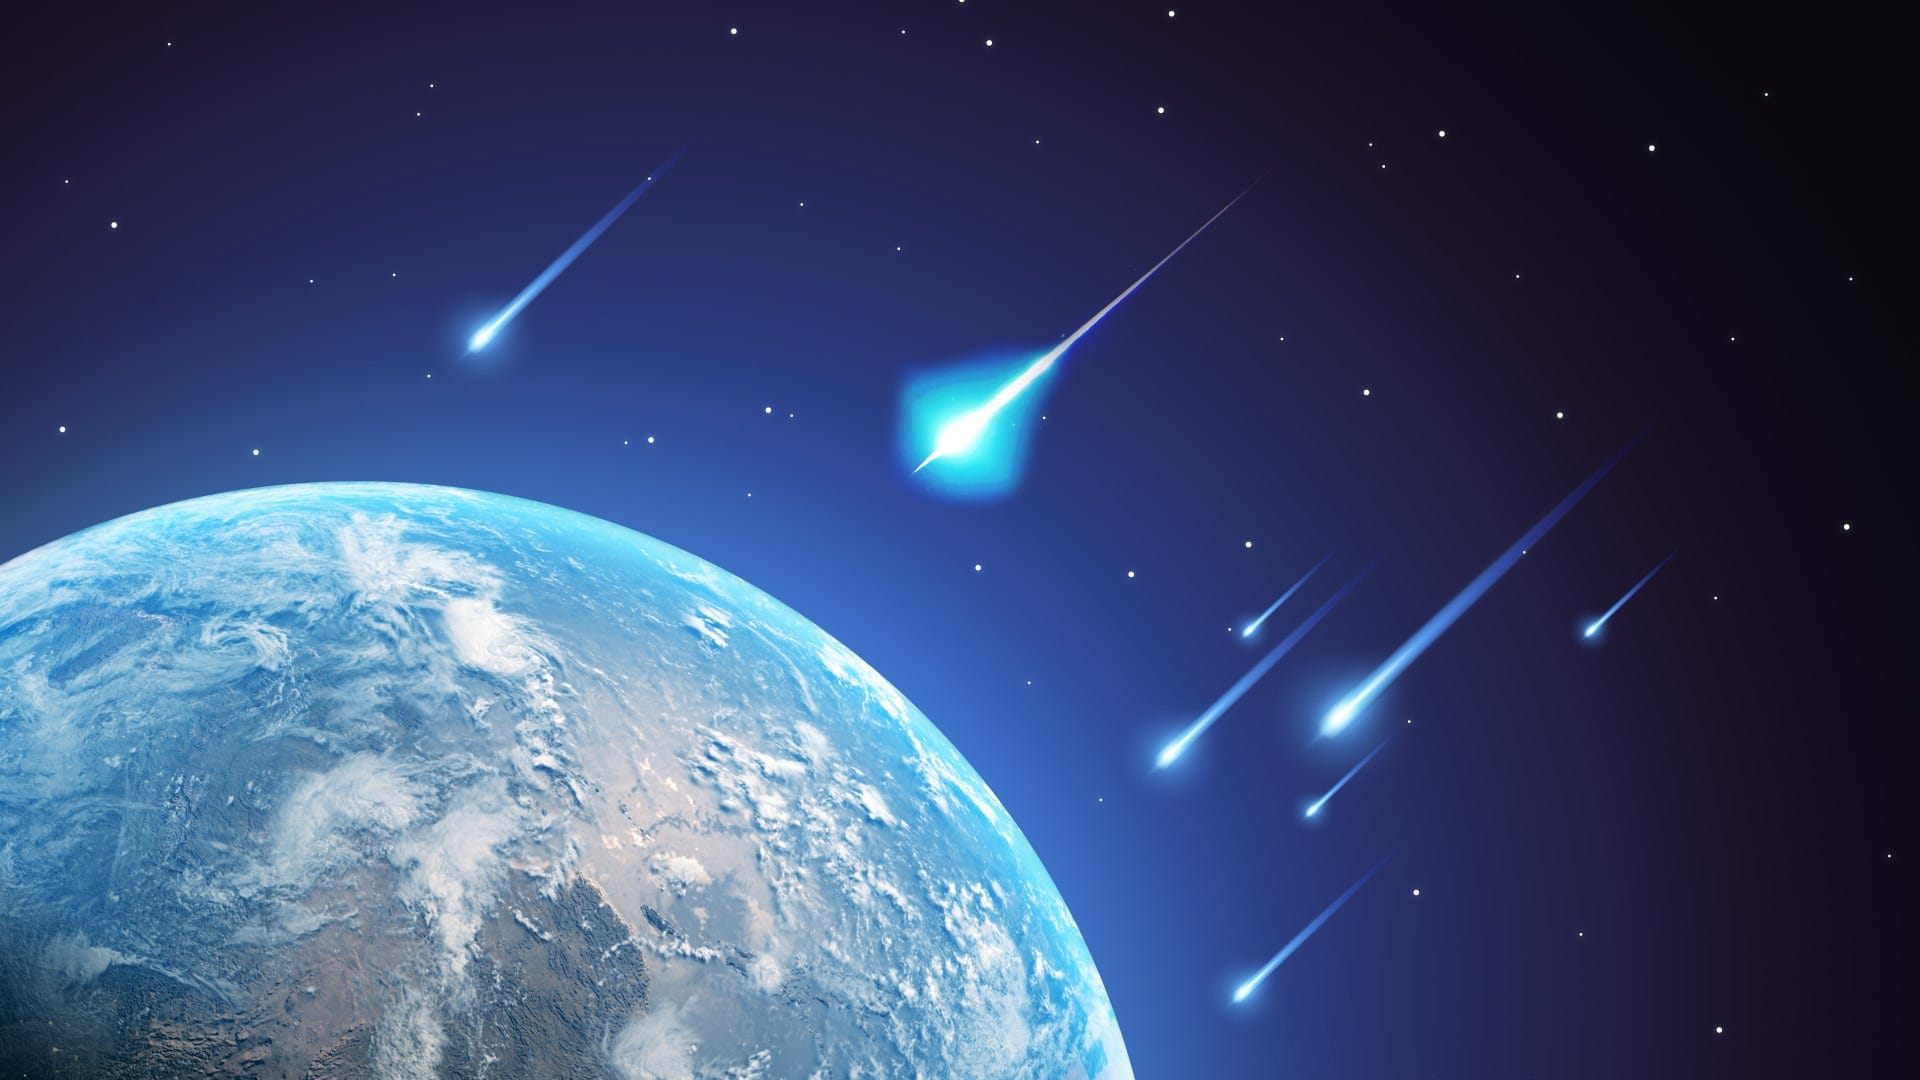 Meteor Showers: All You Need to Know